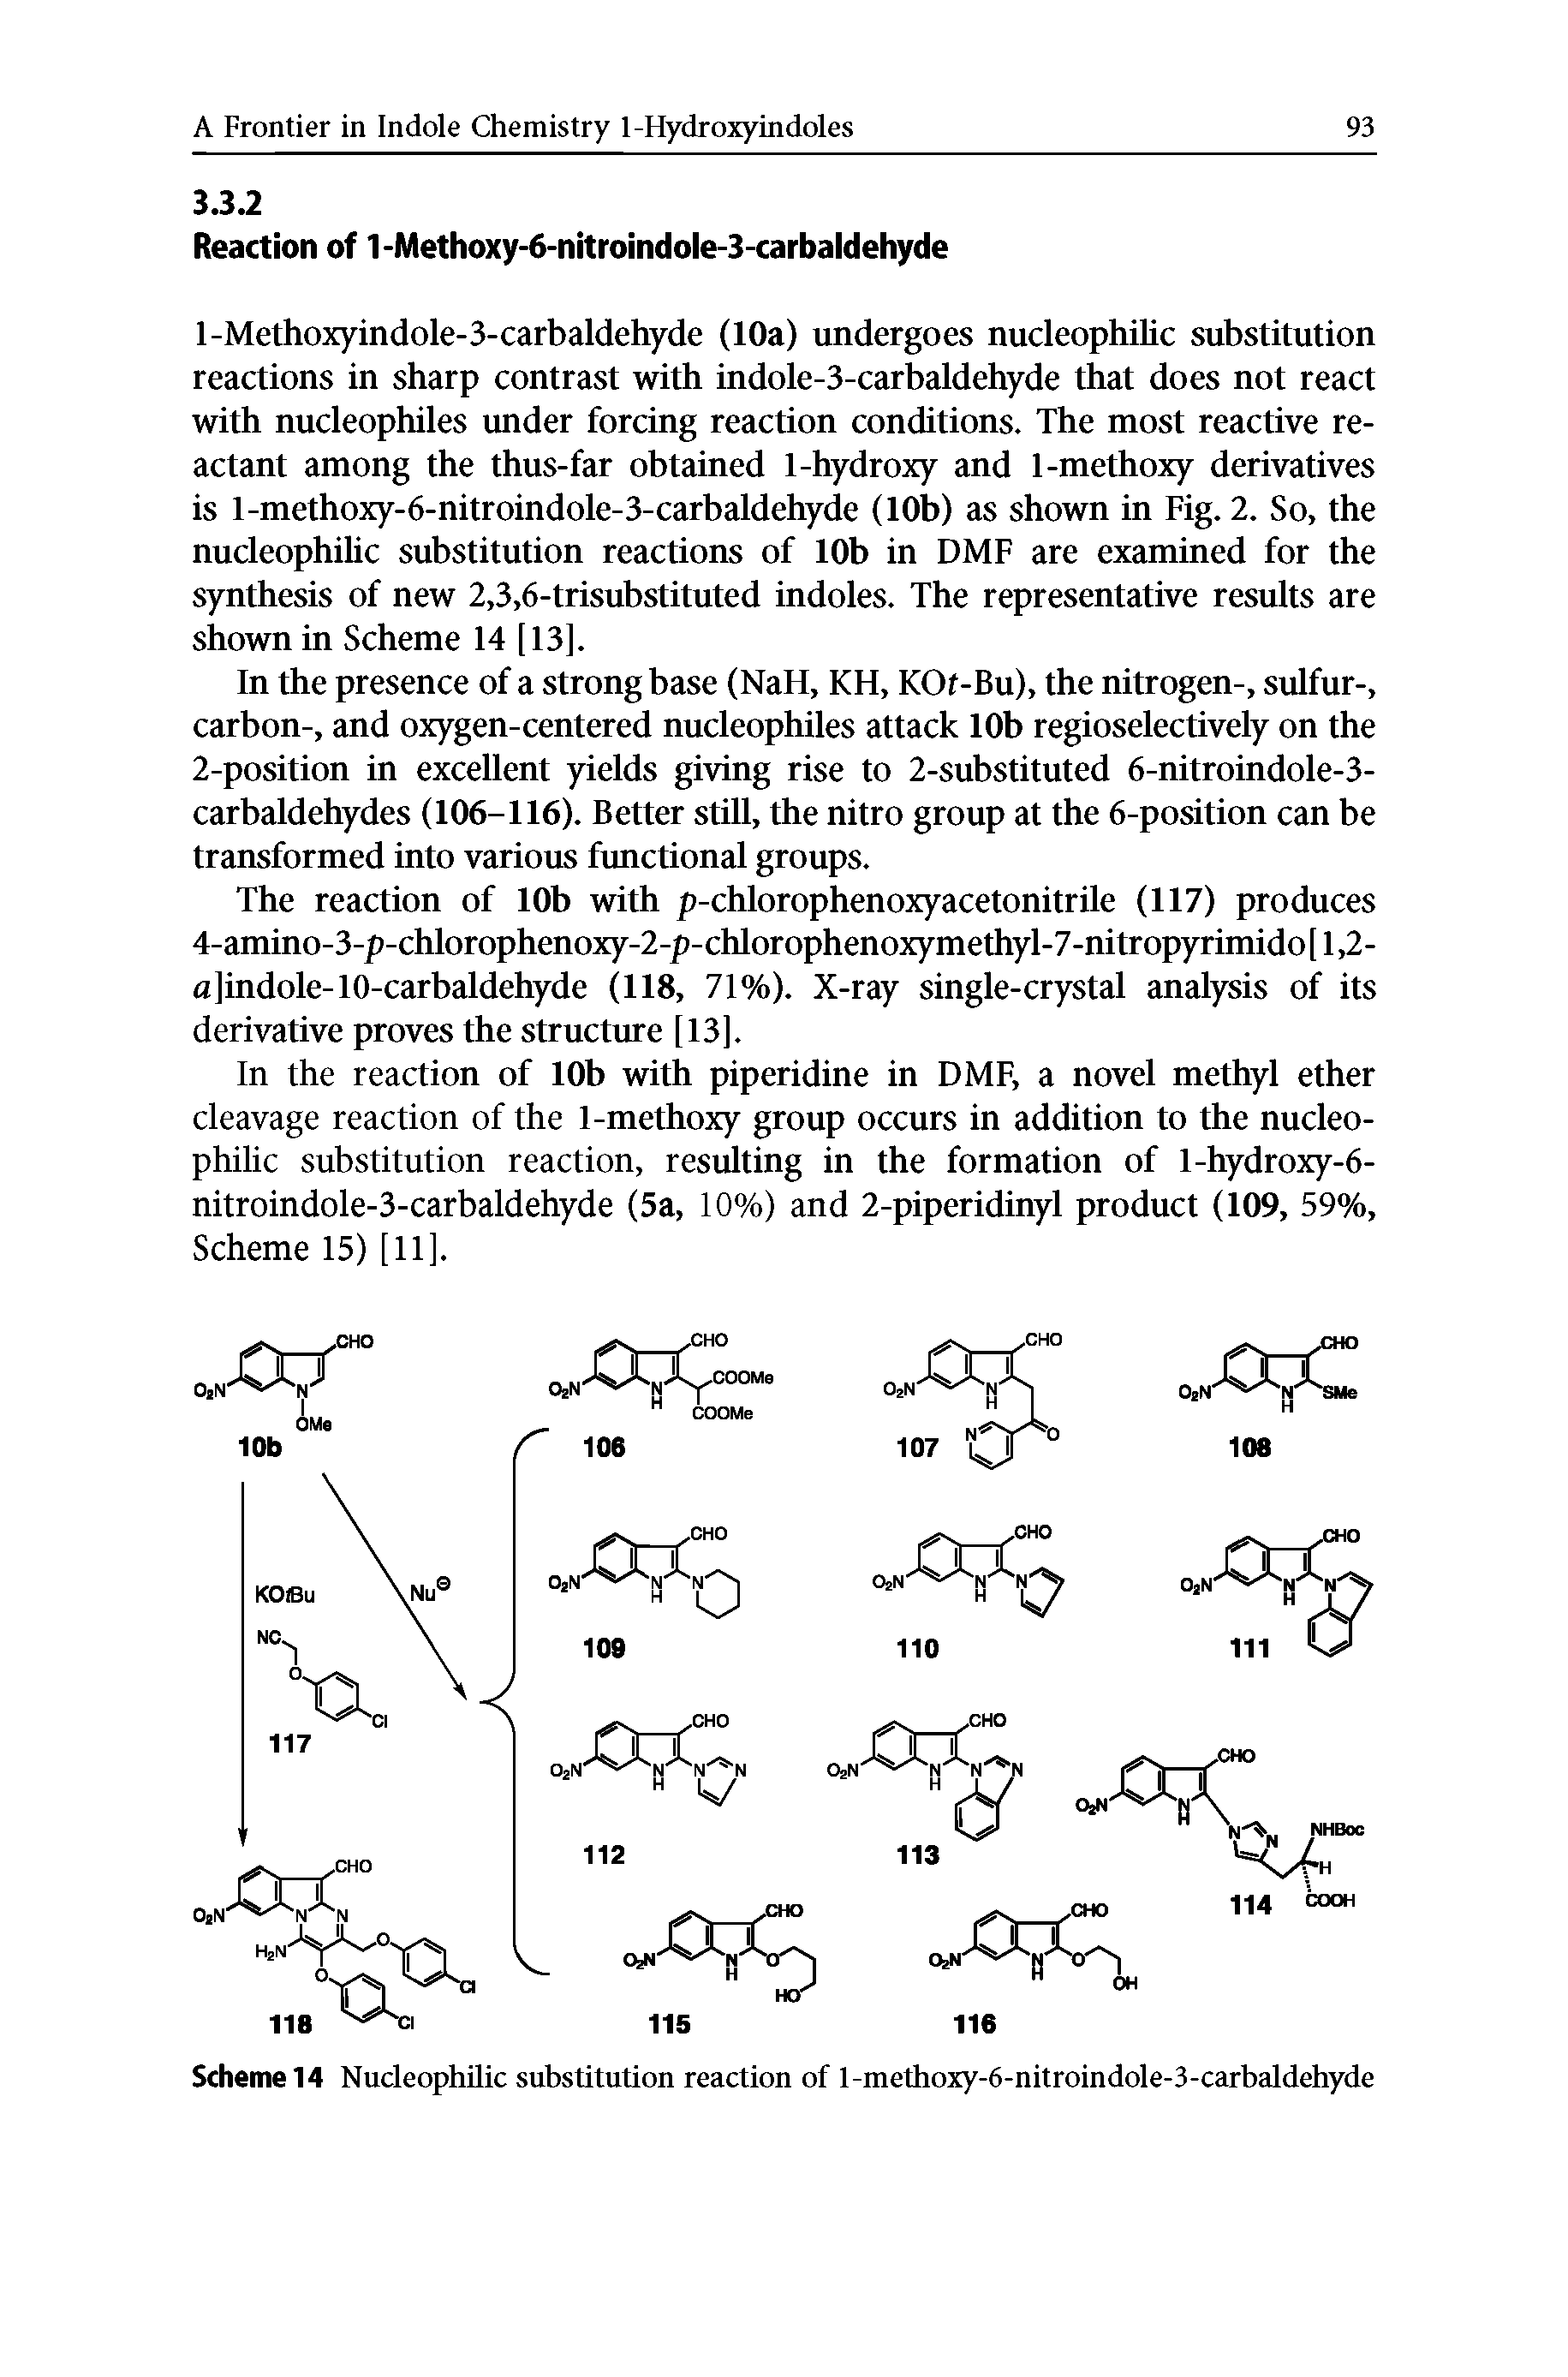 Scheme 14 Nucleophilic substitution reaction of l-methoxy-6-nitroindole-3-carbaldehyde...